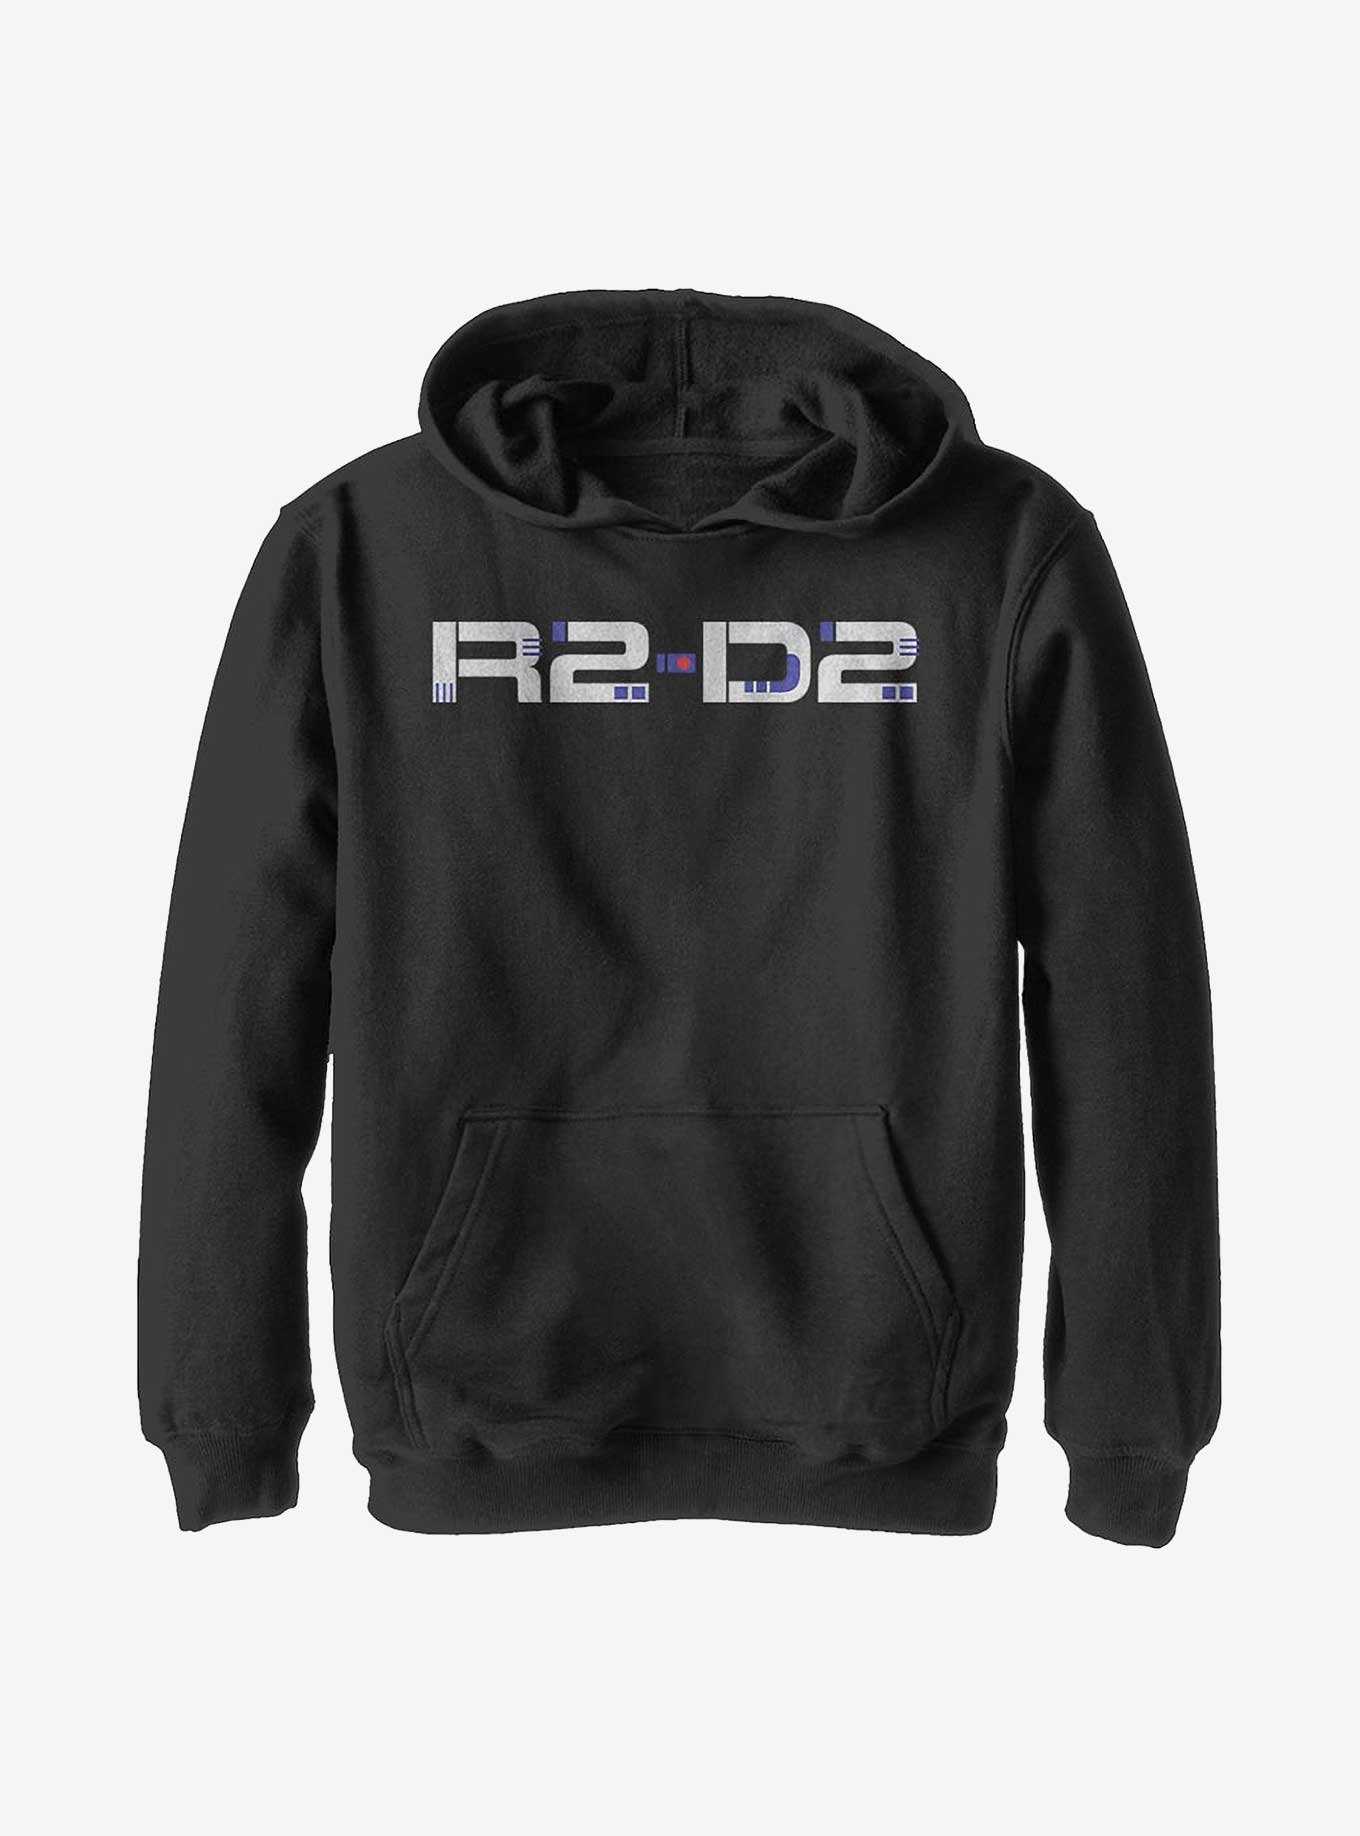 Star Wars Episode IX: The Rise Of Skywalker Droid Design Youth Hoodie, , hi-res